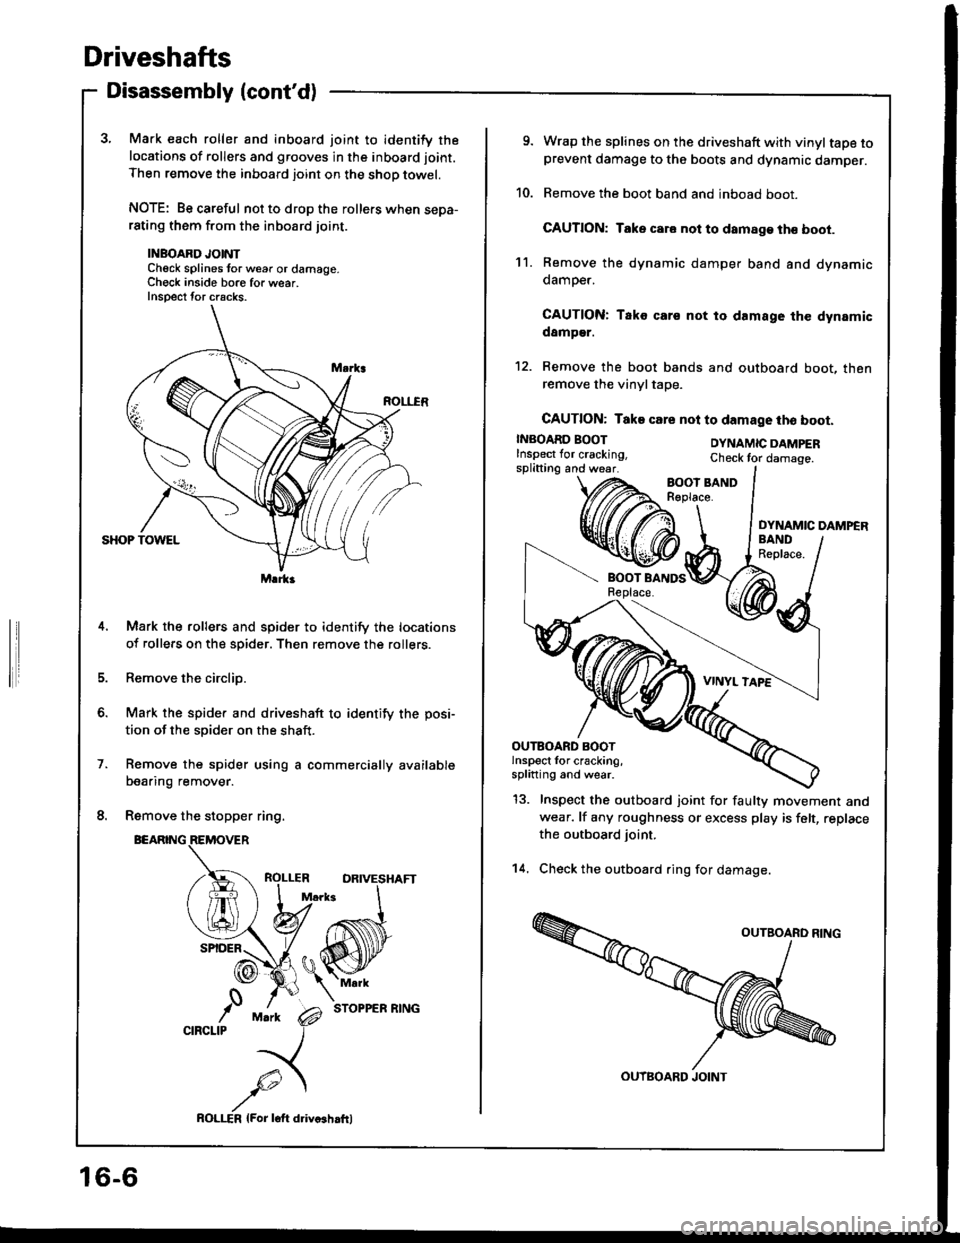 HONDA INTEGRA 1994 4.G User Guide Driveshafts
Disassembly (contd)
3, Mark each roller and inboard joint to identify the
locations of rollers and grooves in the inboard joint.
Then remove the inboard joint on the shop towel.
NOTE: Be 